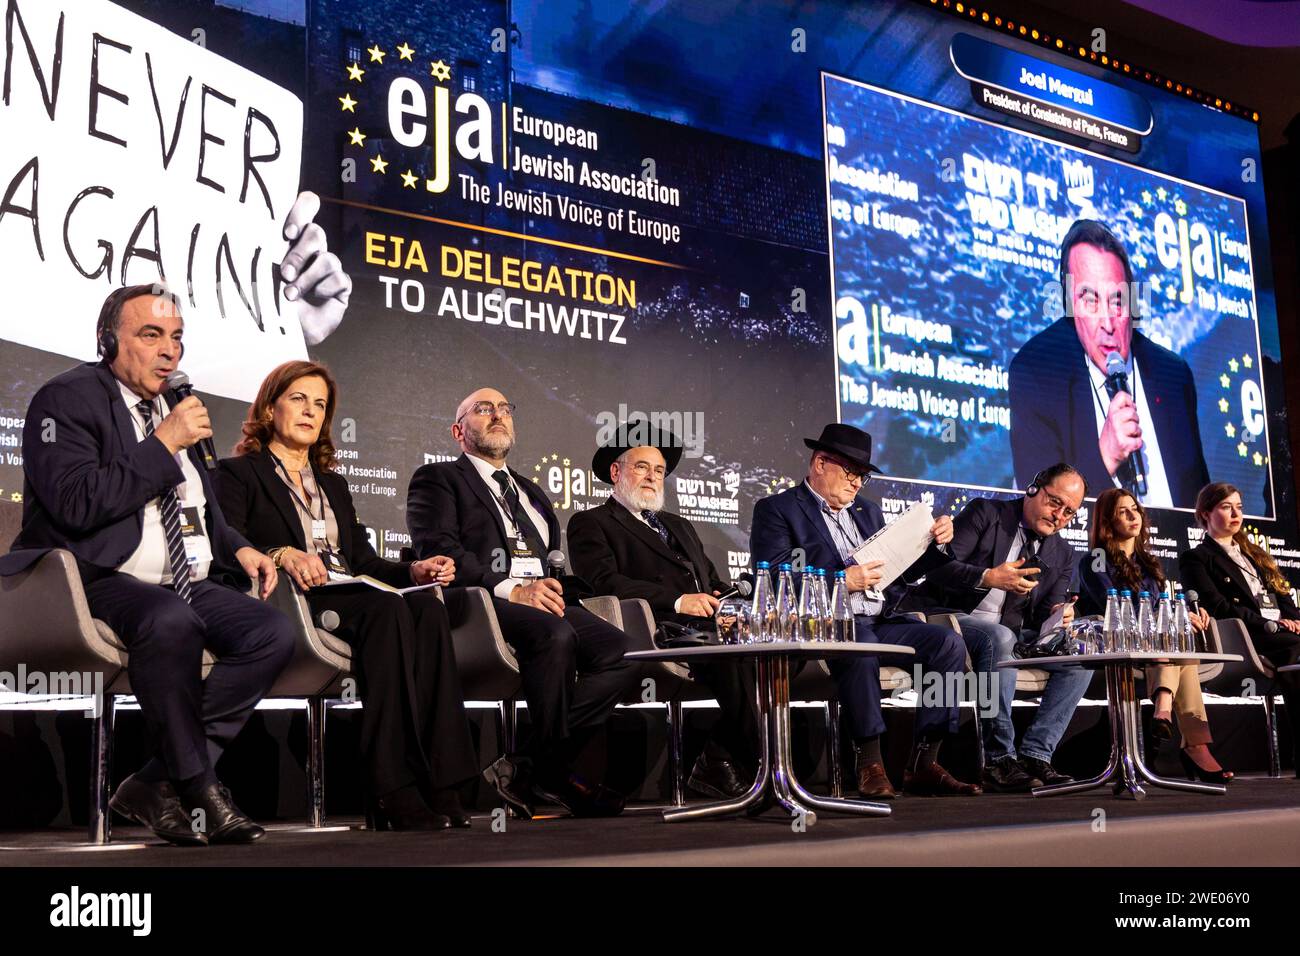 Regional European community leaders speak during the European Jewish Association symposium - The Jewish Voice of Europe in the Conference Hall in Doubletree Hilton hotel in Krakow, Poland on January 22, 2024. The meeting discusses increased antisemitism in Europe after the brutal October 7 2023 attack and Israeli war in Gaza Strip. Stock Photo